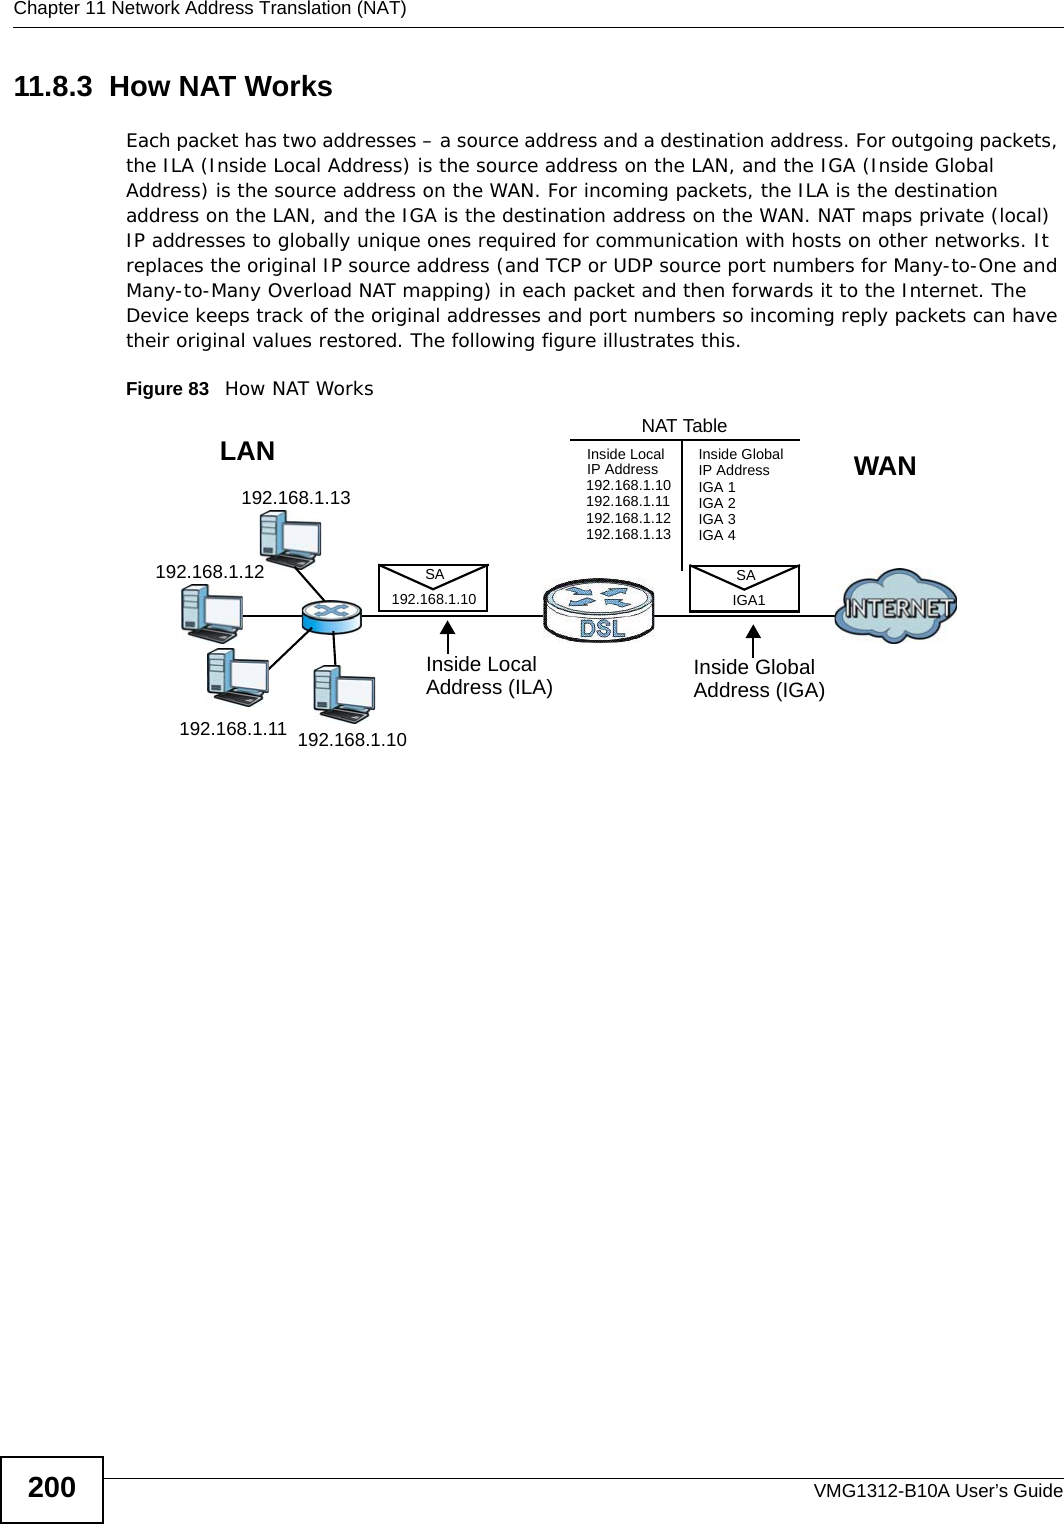 Chapter 11 Network Address Translation (NAT)VMG1312-B10A User’s Guide20011.8.3  How NAT WorksEach packet has two addresses – a source address and a destination address. For outgoing packets, the ILA (Inside Local Address) is the source address on the LAN, and the IGA (Inside Global Address) is the source address on the WAN. For incoming packets, the ILA is the destination address on the LAN, and the IGA is the destination address on the WAN. NAT maps private (local) IP addresses to globally unique ones required for communication with hosts on other networks. It replaces the original IP source address (and TCP or UDP source port numbers for Many-to-One and Many-to-Many Overload NAT mapping) in each packet and then forwards it to the Internet. The Device keeps track of the original addresses and port numbers so incoming reply packets can have their original values restored. The following figure illustrates this.Figure 83   How NAT Works192.168.1.13192.168.1.10192.168.1.11192.168.1.12 SA192.168.1.10SAIGA1Inside LocalIP Address192.168.1.10192.168.1.11192.168.1.12192.168.1.13Inside Global IP AddressIGA 1IGA 2IGA 3IGA 4NAT TableWANLANInside LocalAddress (ILA) Inside GlobalAddress (IGA)